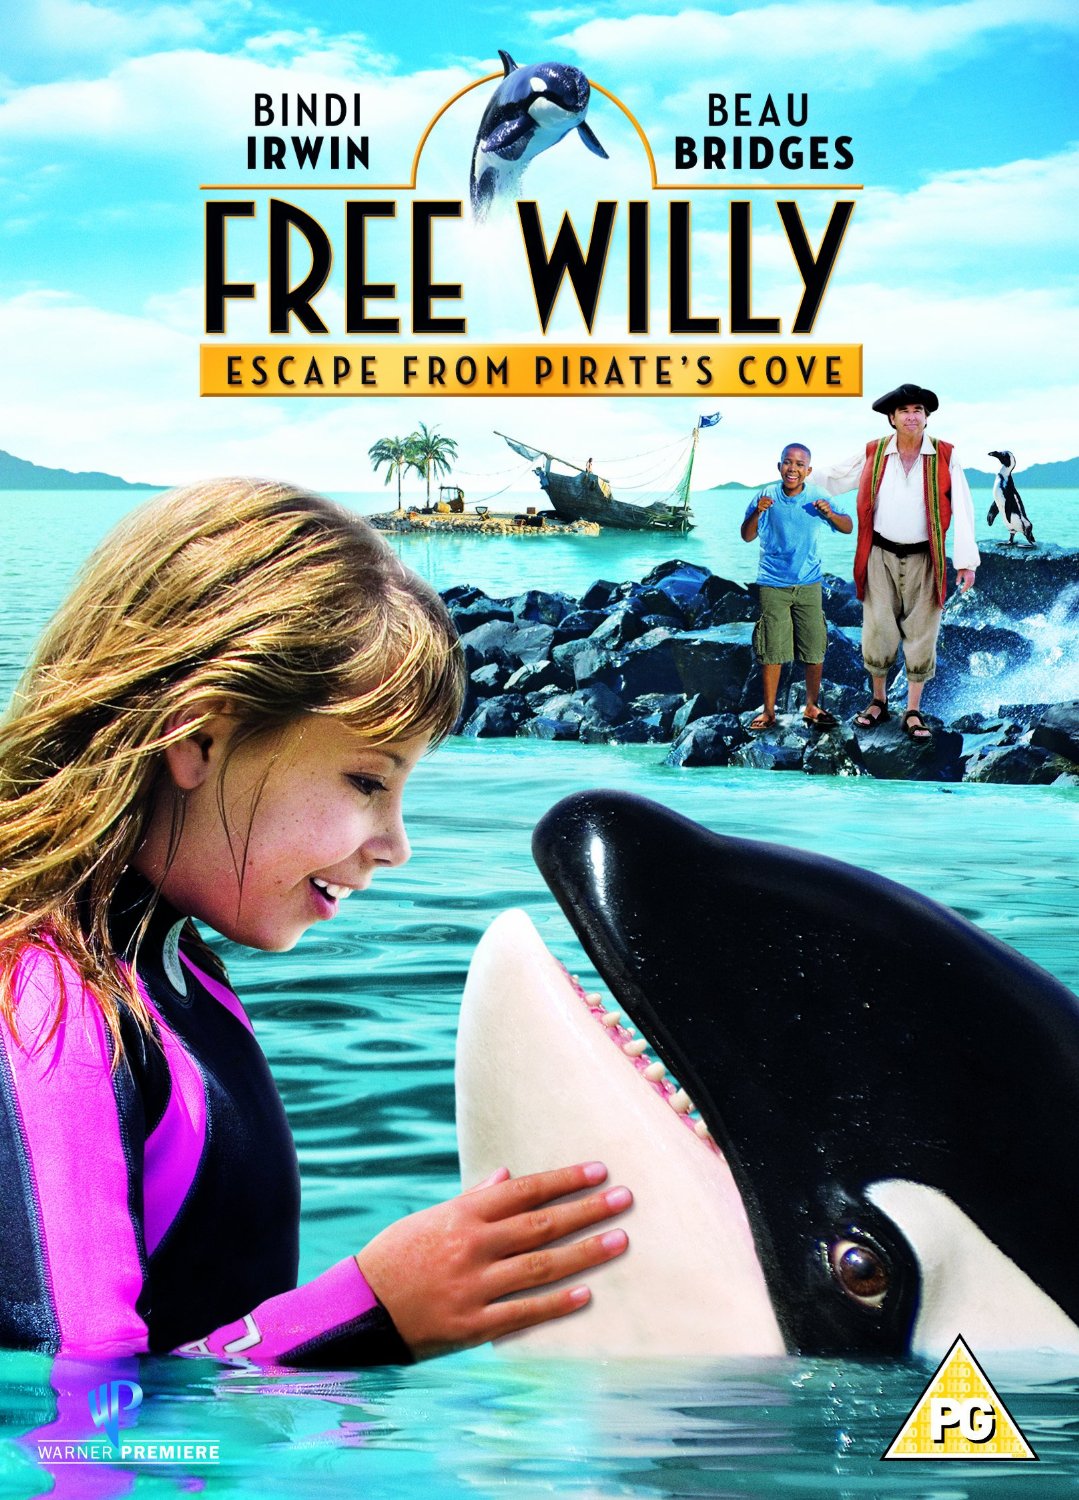 Free Willy 4: Escape from Pirate's Cove (2010)